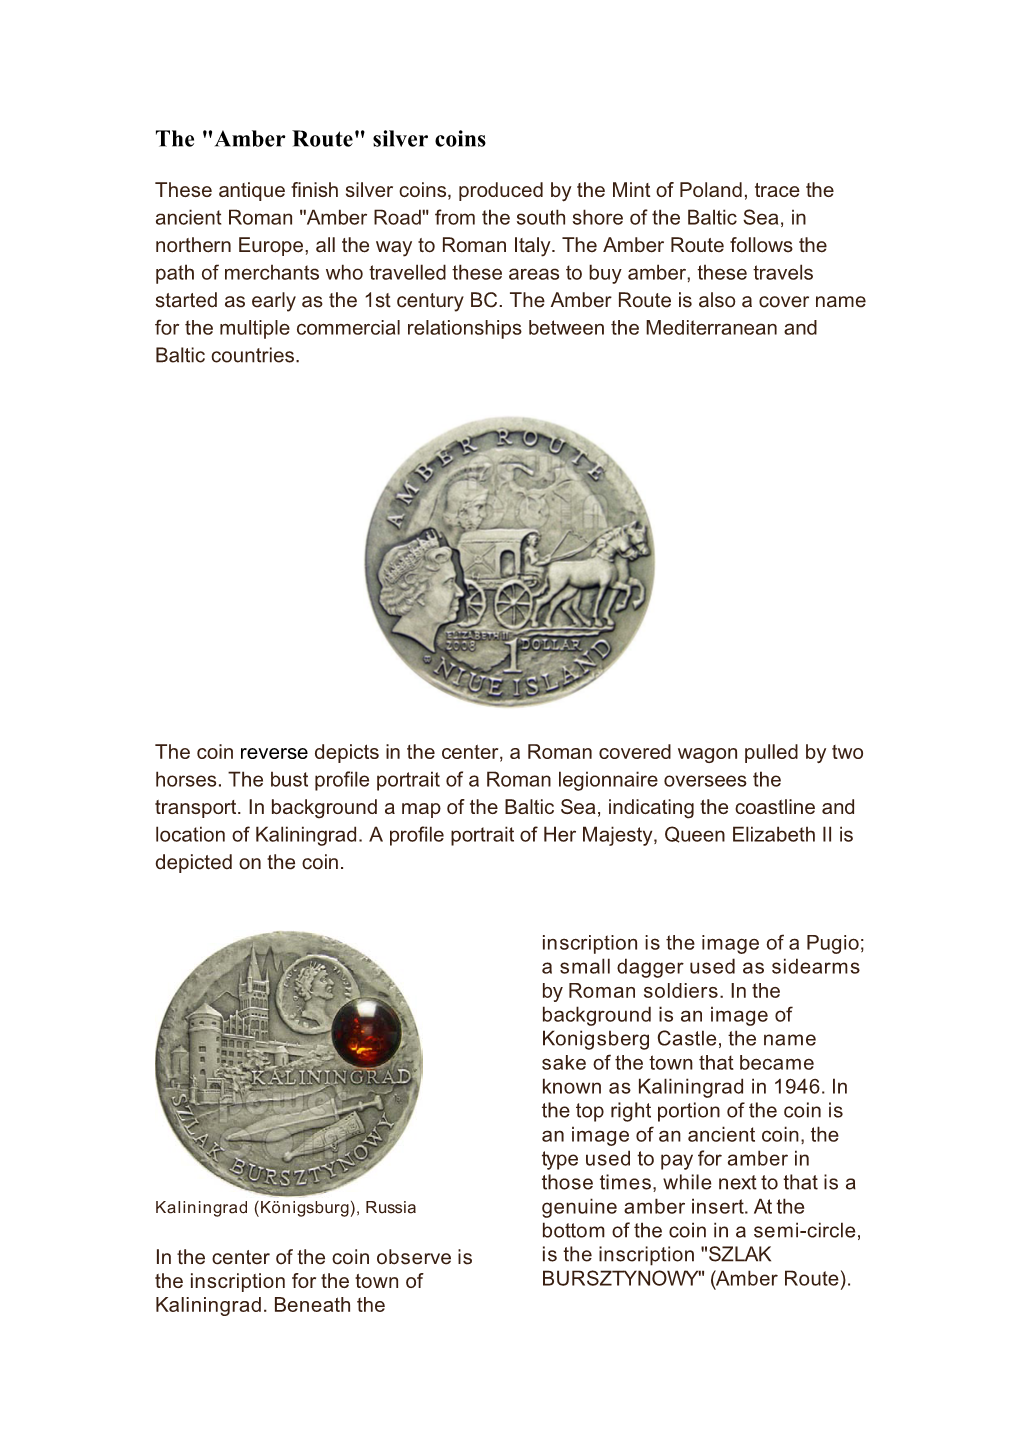 The "Amber Route" Silver Coins